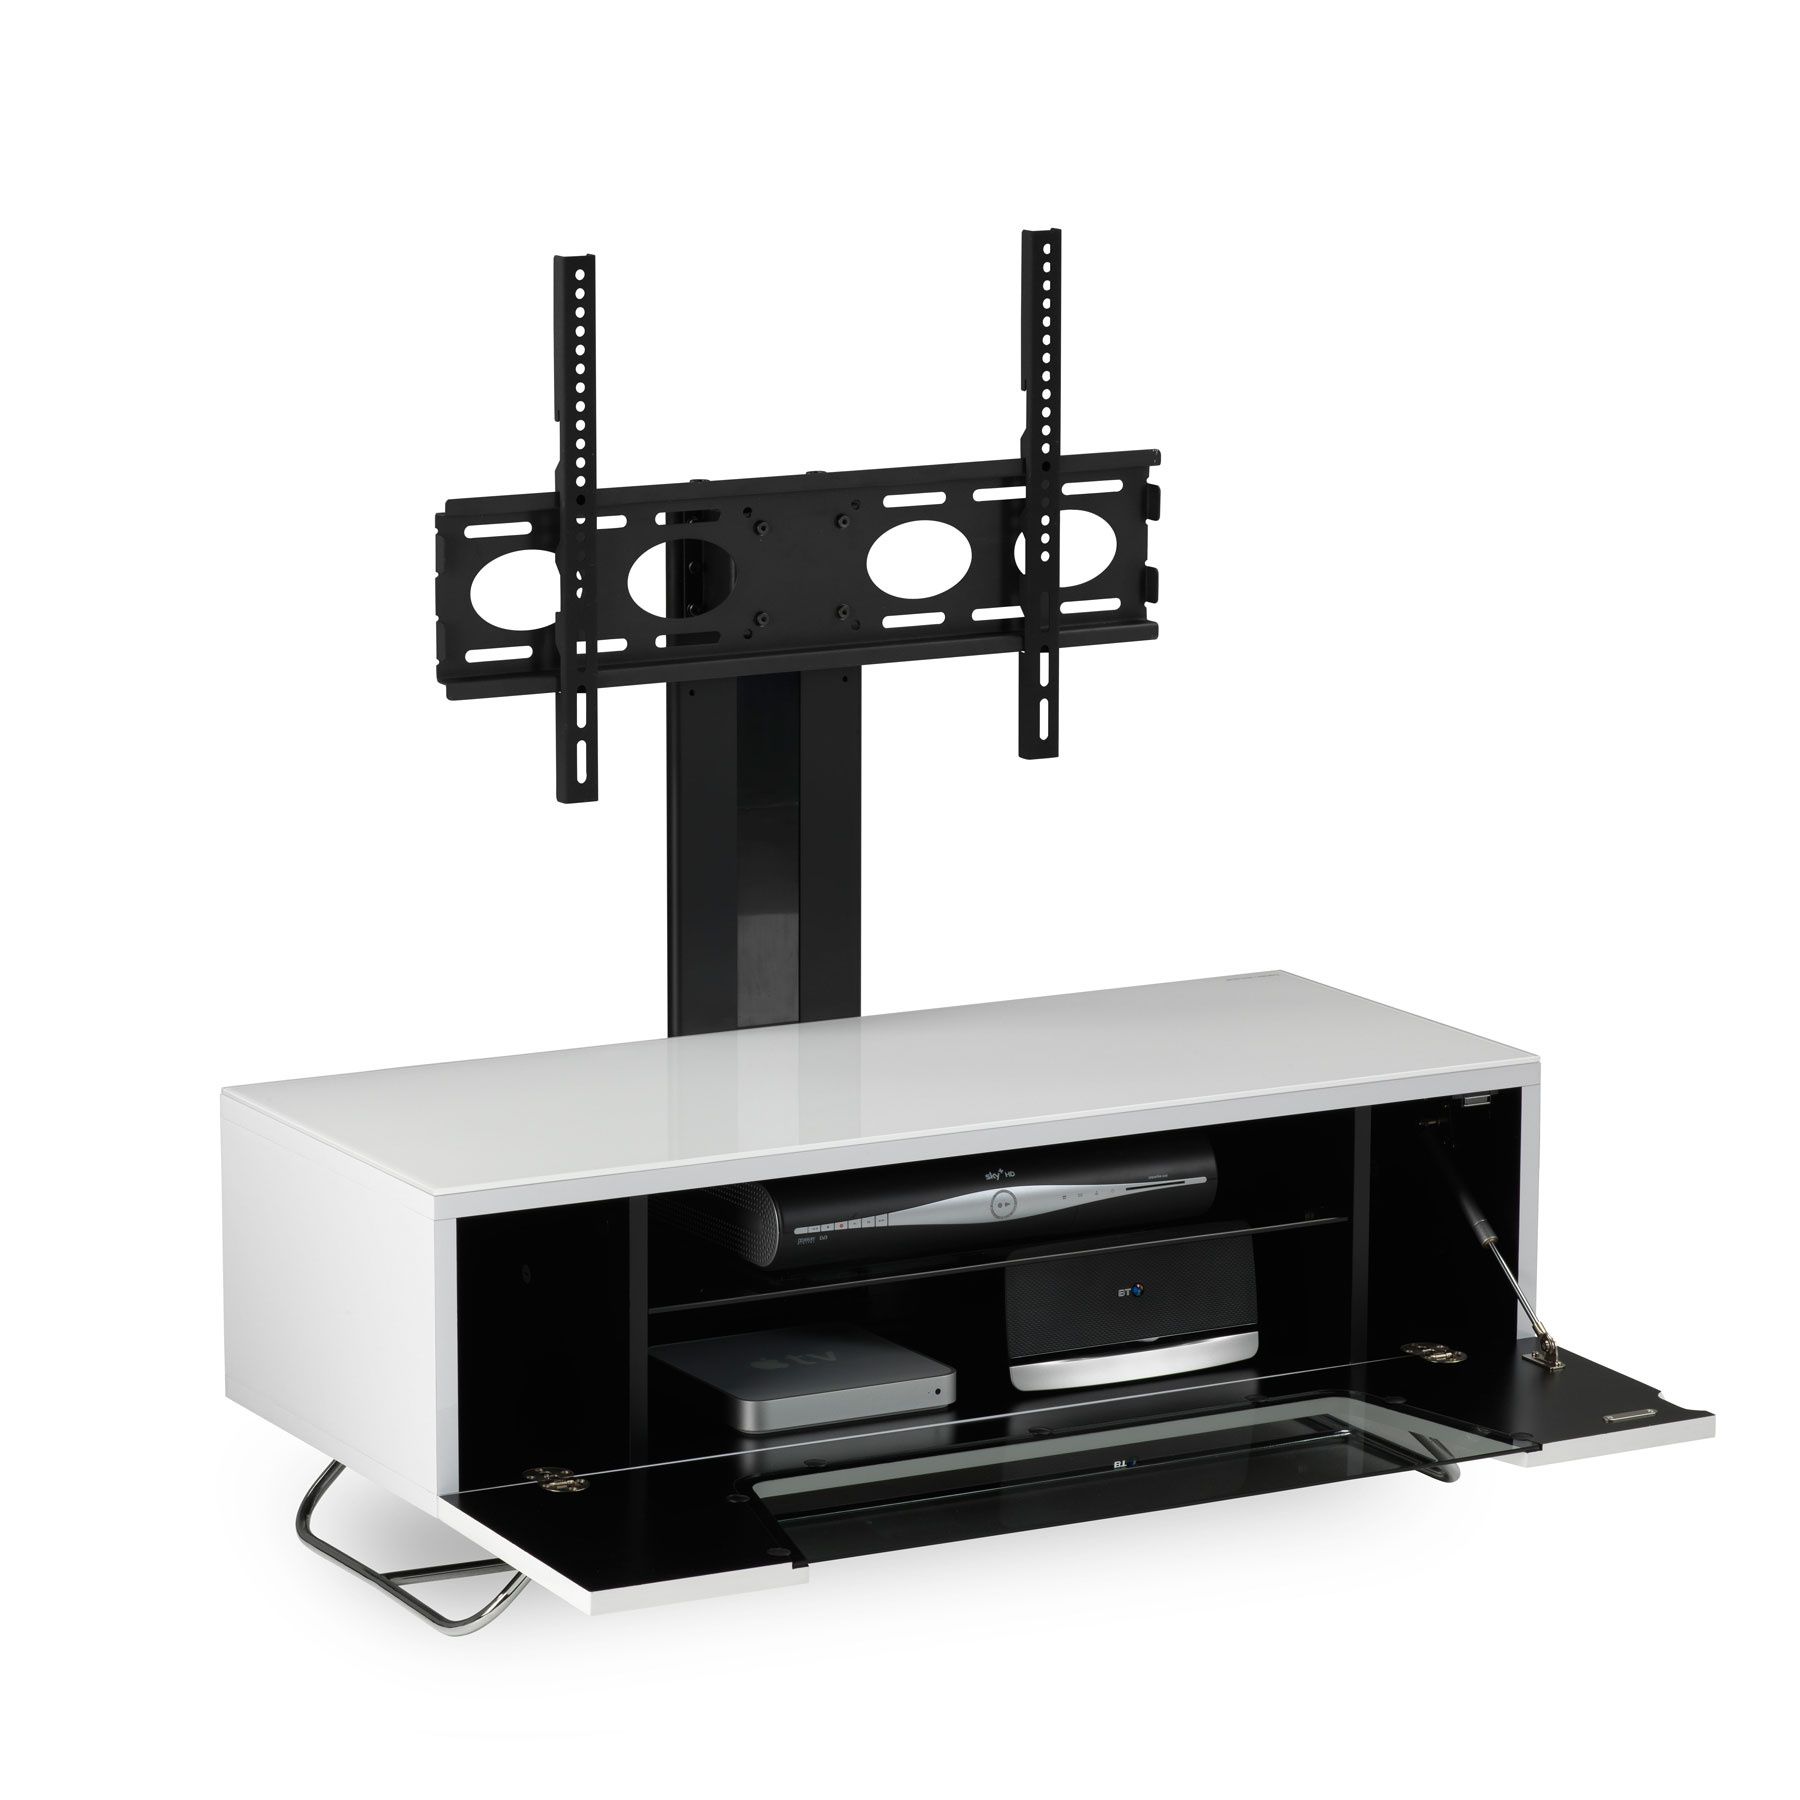 Alphason Chromium 2 100cm White Tv Stand For Up To 50" Tvs Intended For Tv Stands For Tvs Up To 50" (View 8 of 15)